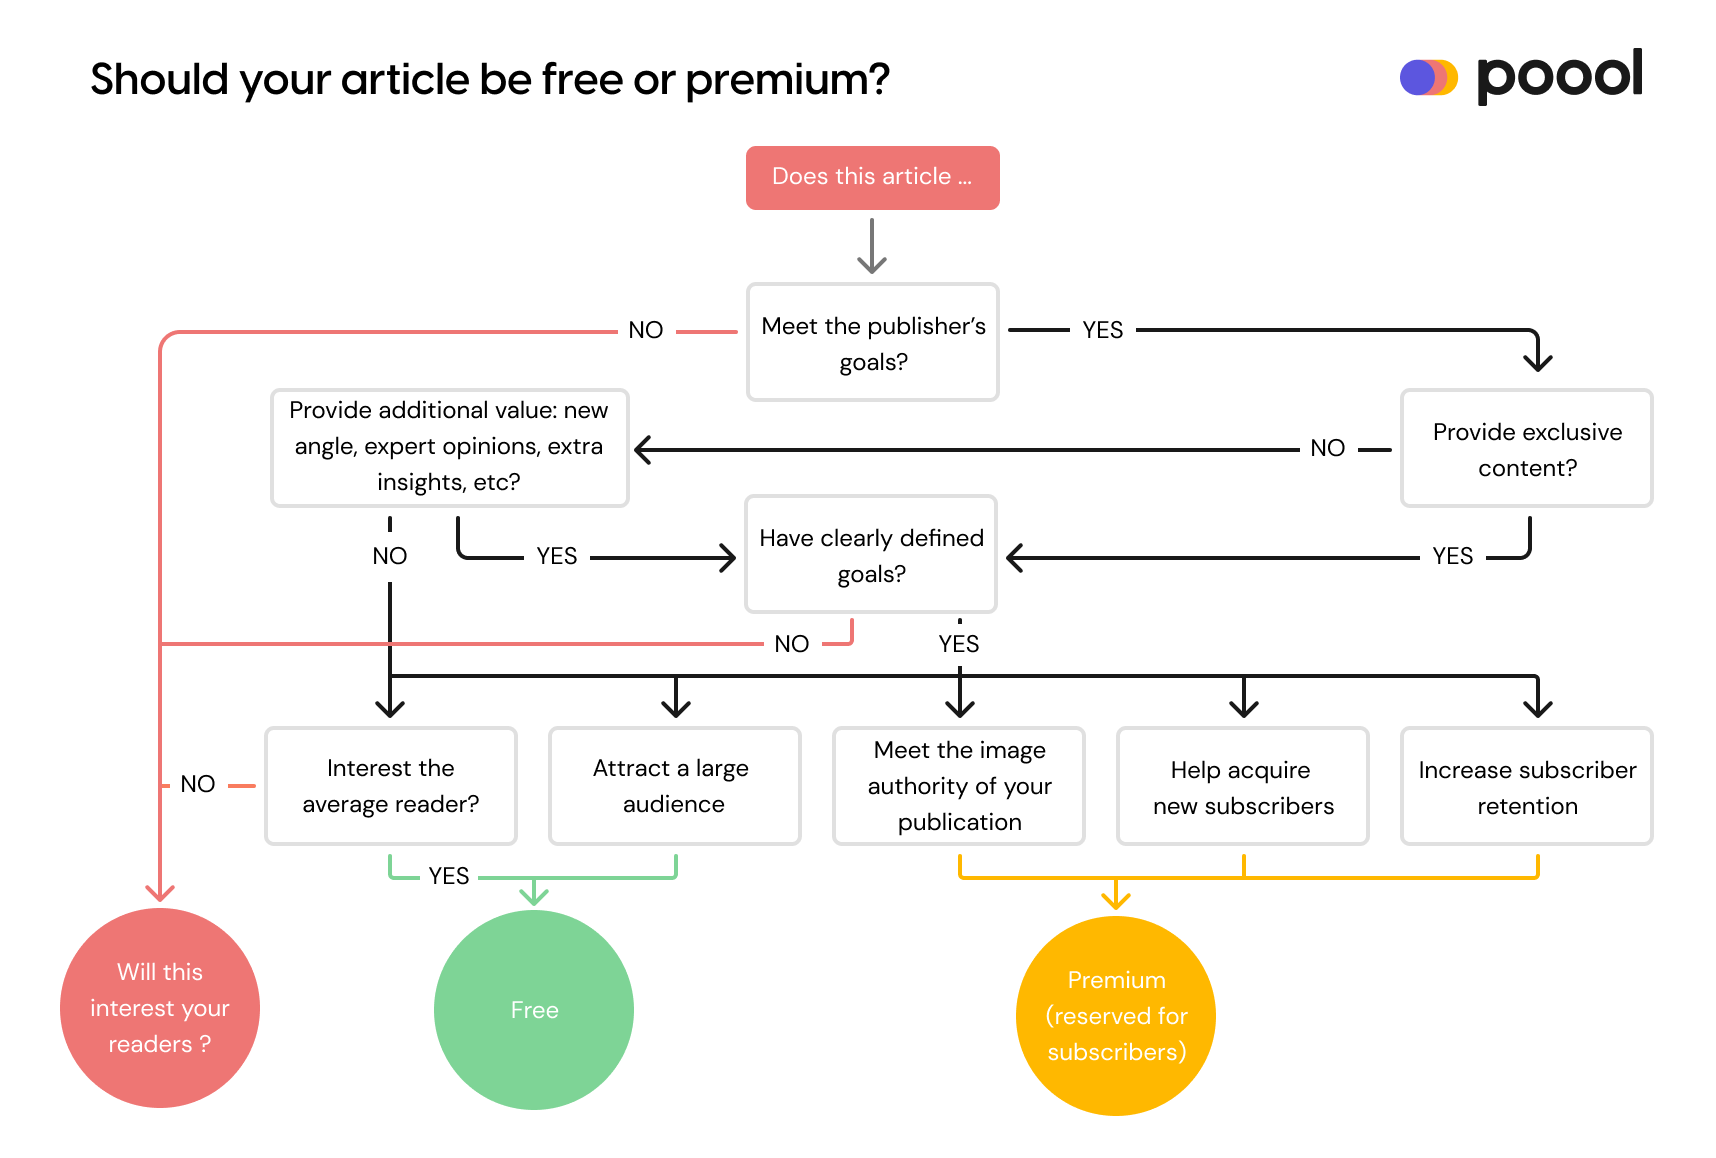 Free or Premium?  The decision-making process for your articles in a freemium strategy.